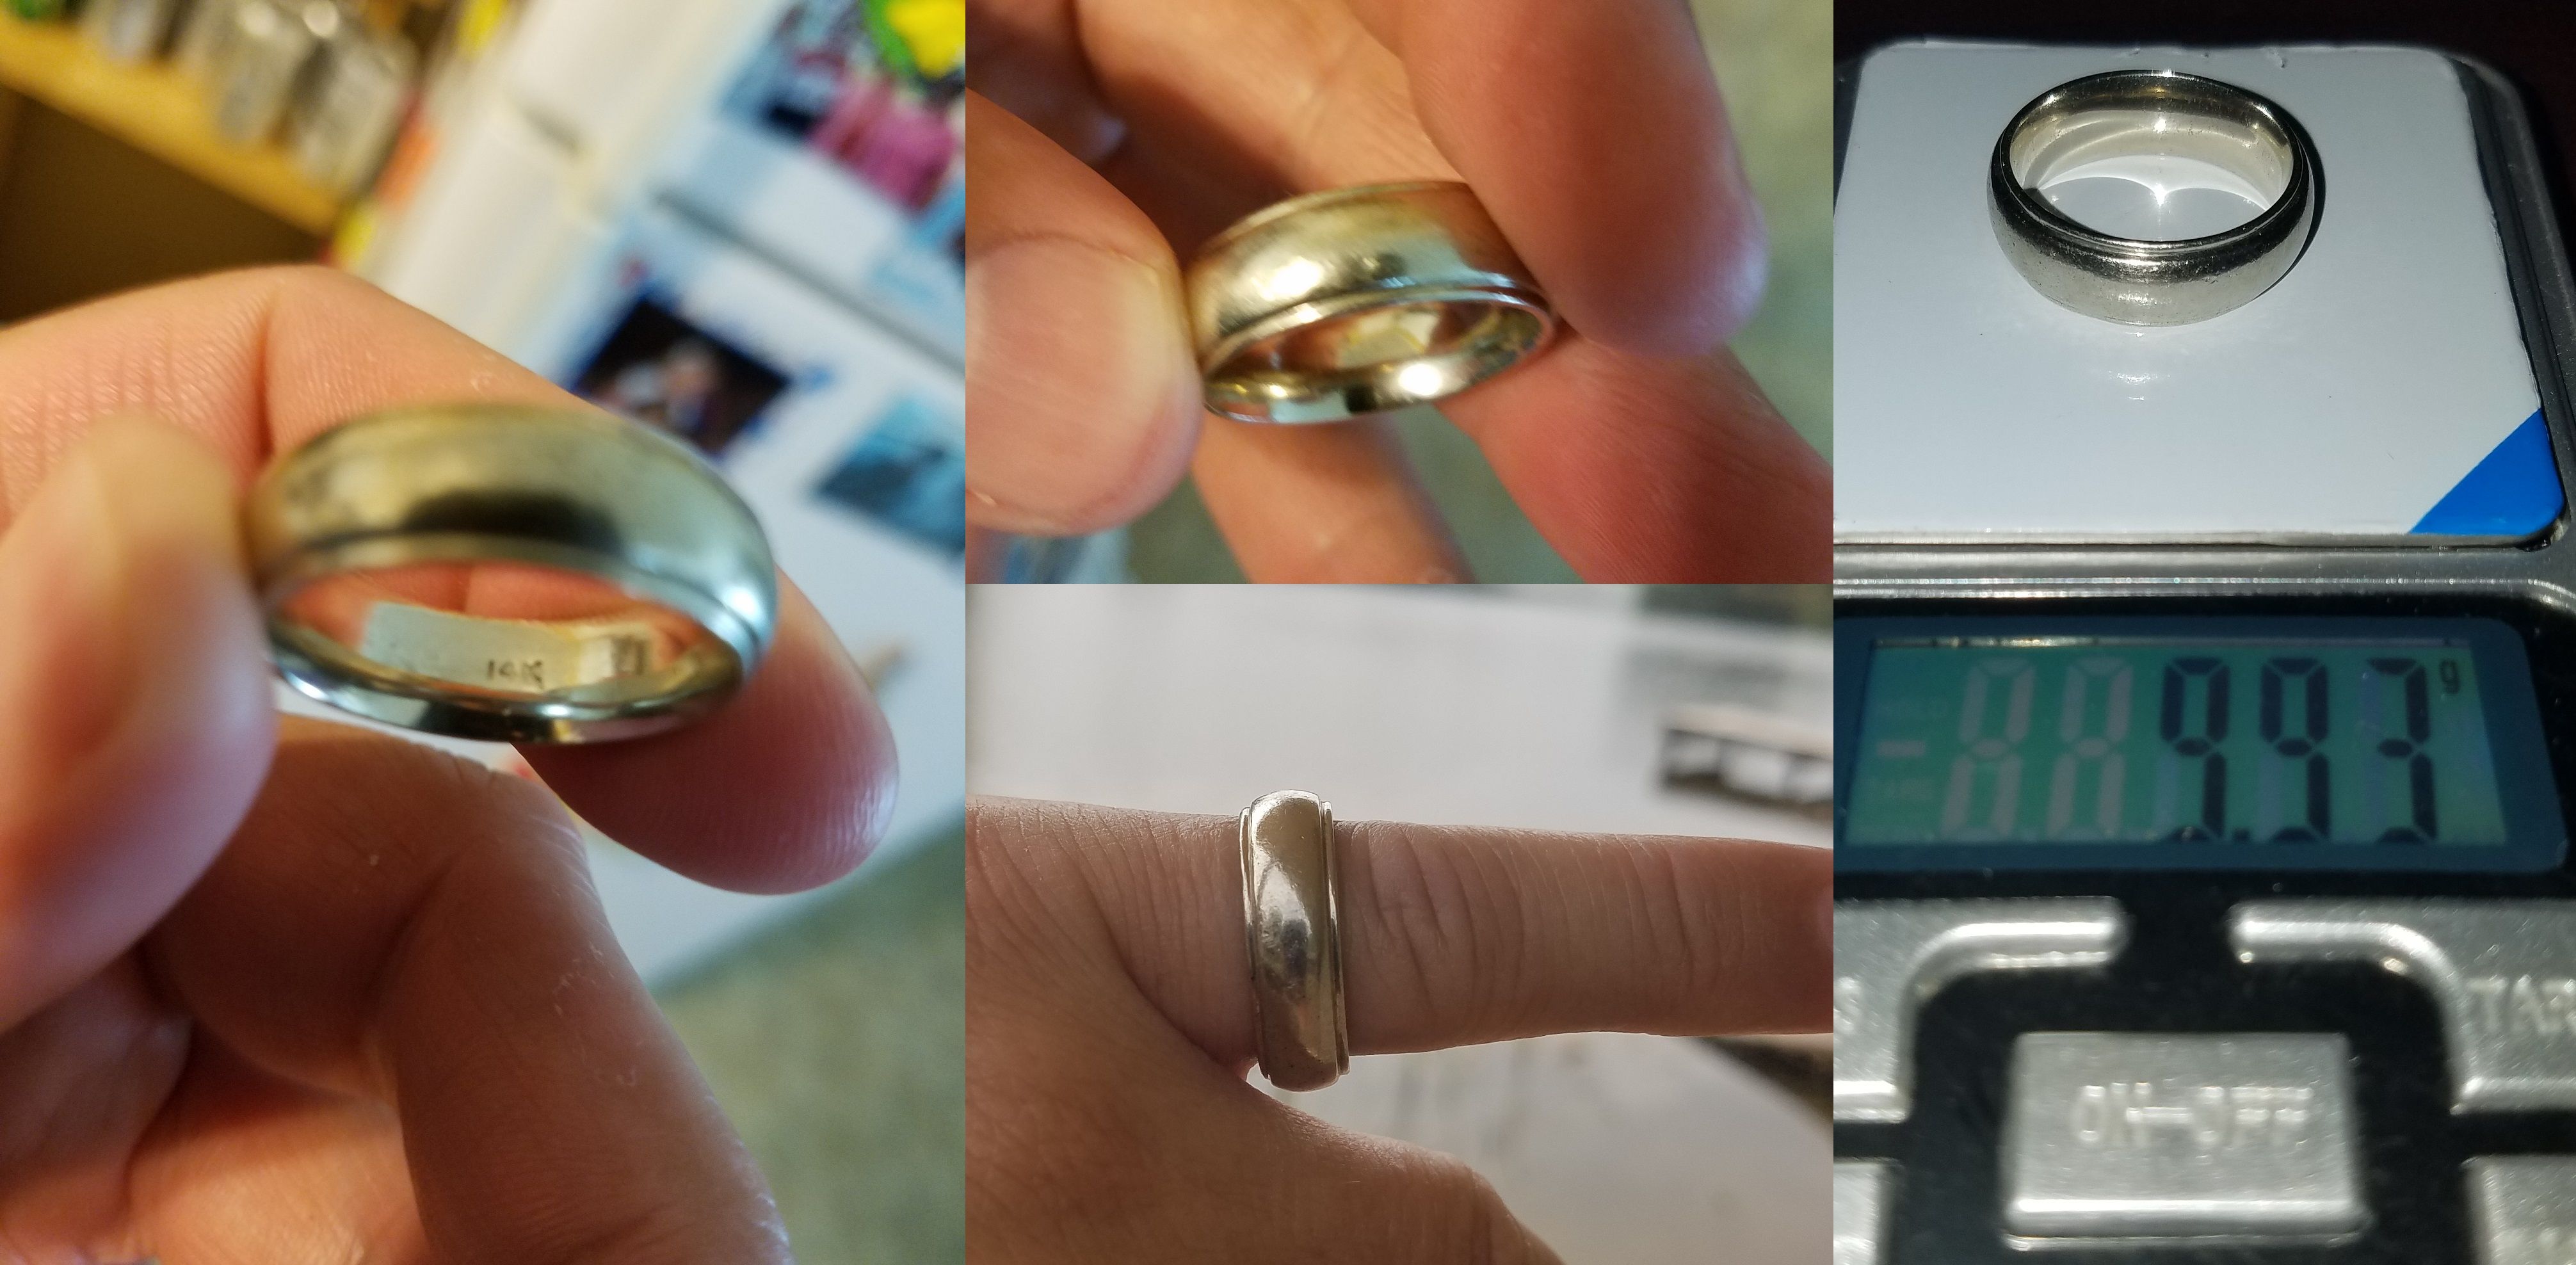 20160703 9.93g White Gold Men's Wedding Band found in the Biloxi waters with the CZ20.